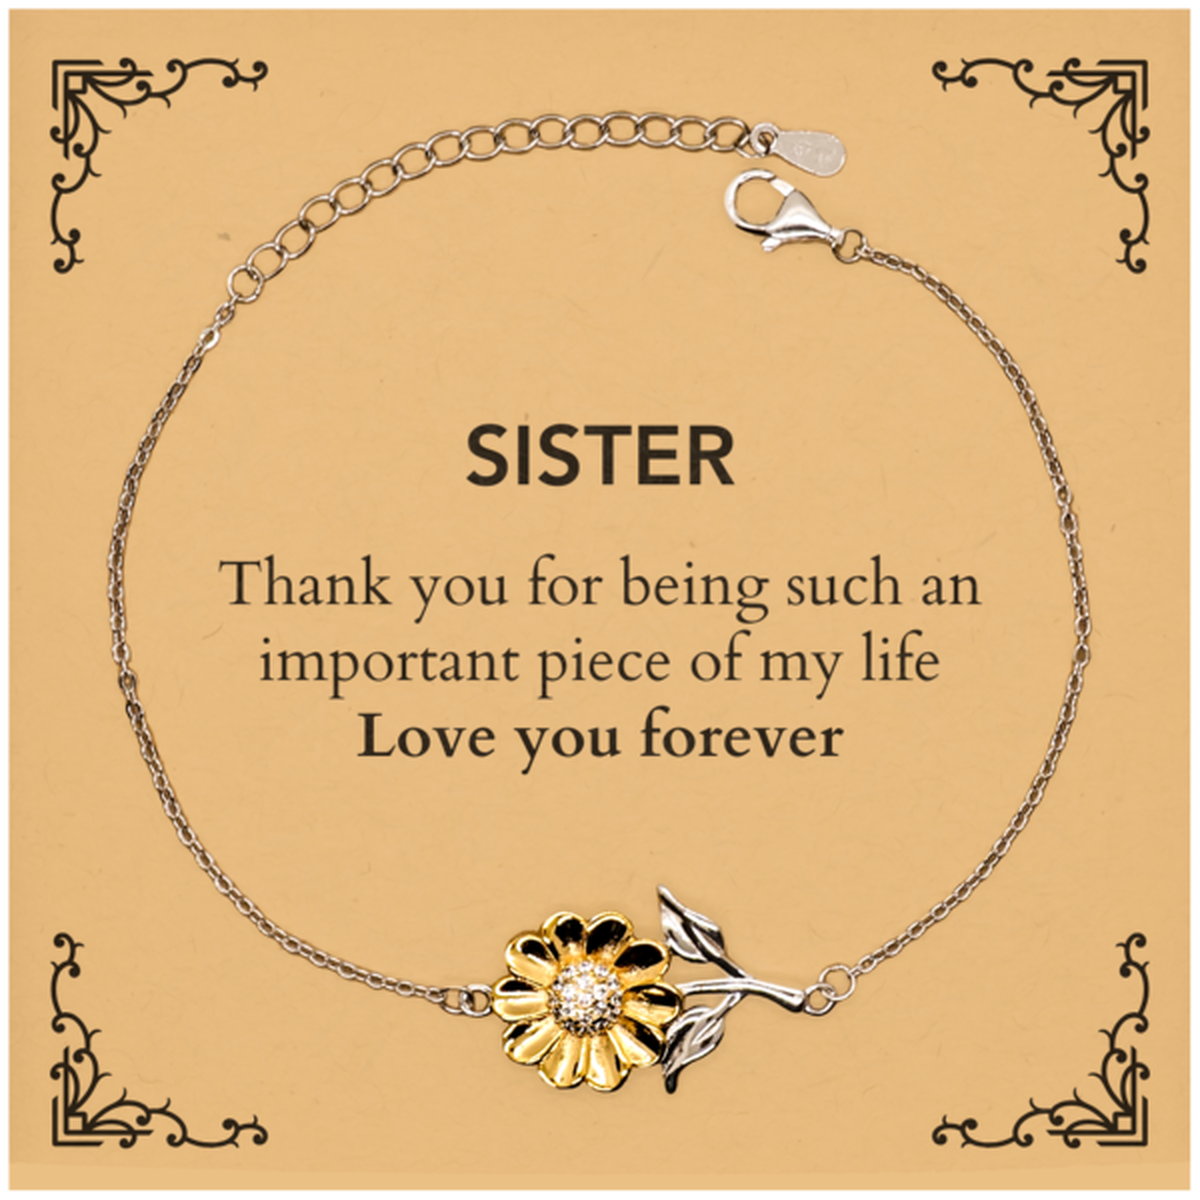 Appropriate Sister Sunflower Bracelet Epic Birthday Gifts for Sister Thank you for being such an important piece of my life Sister Christmas Mothers Fathers Day